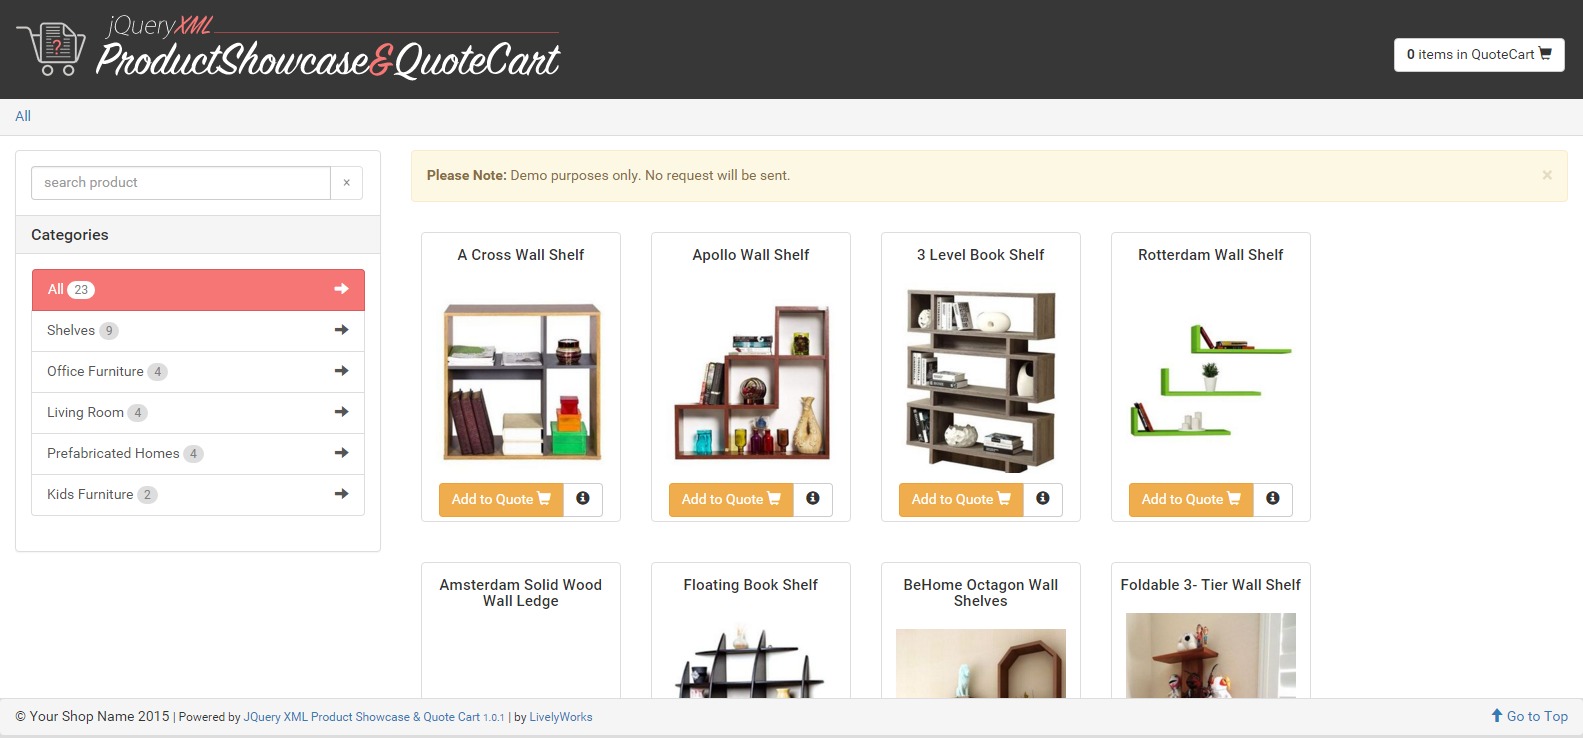 JQuery XML Product Showcase Quote Cart